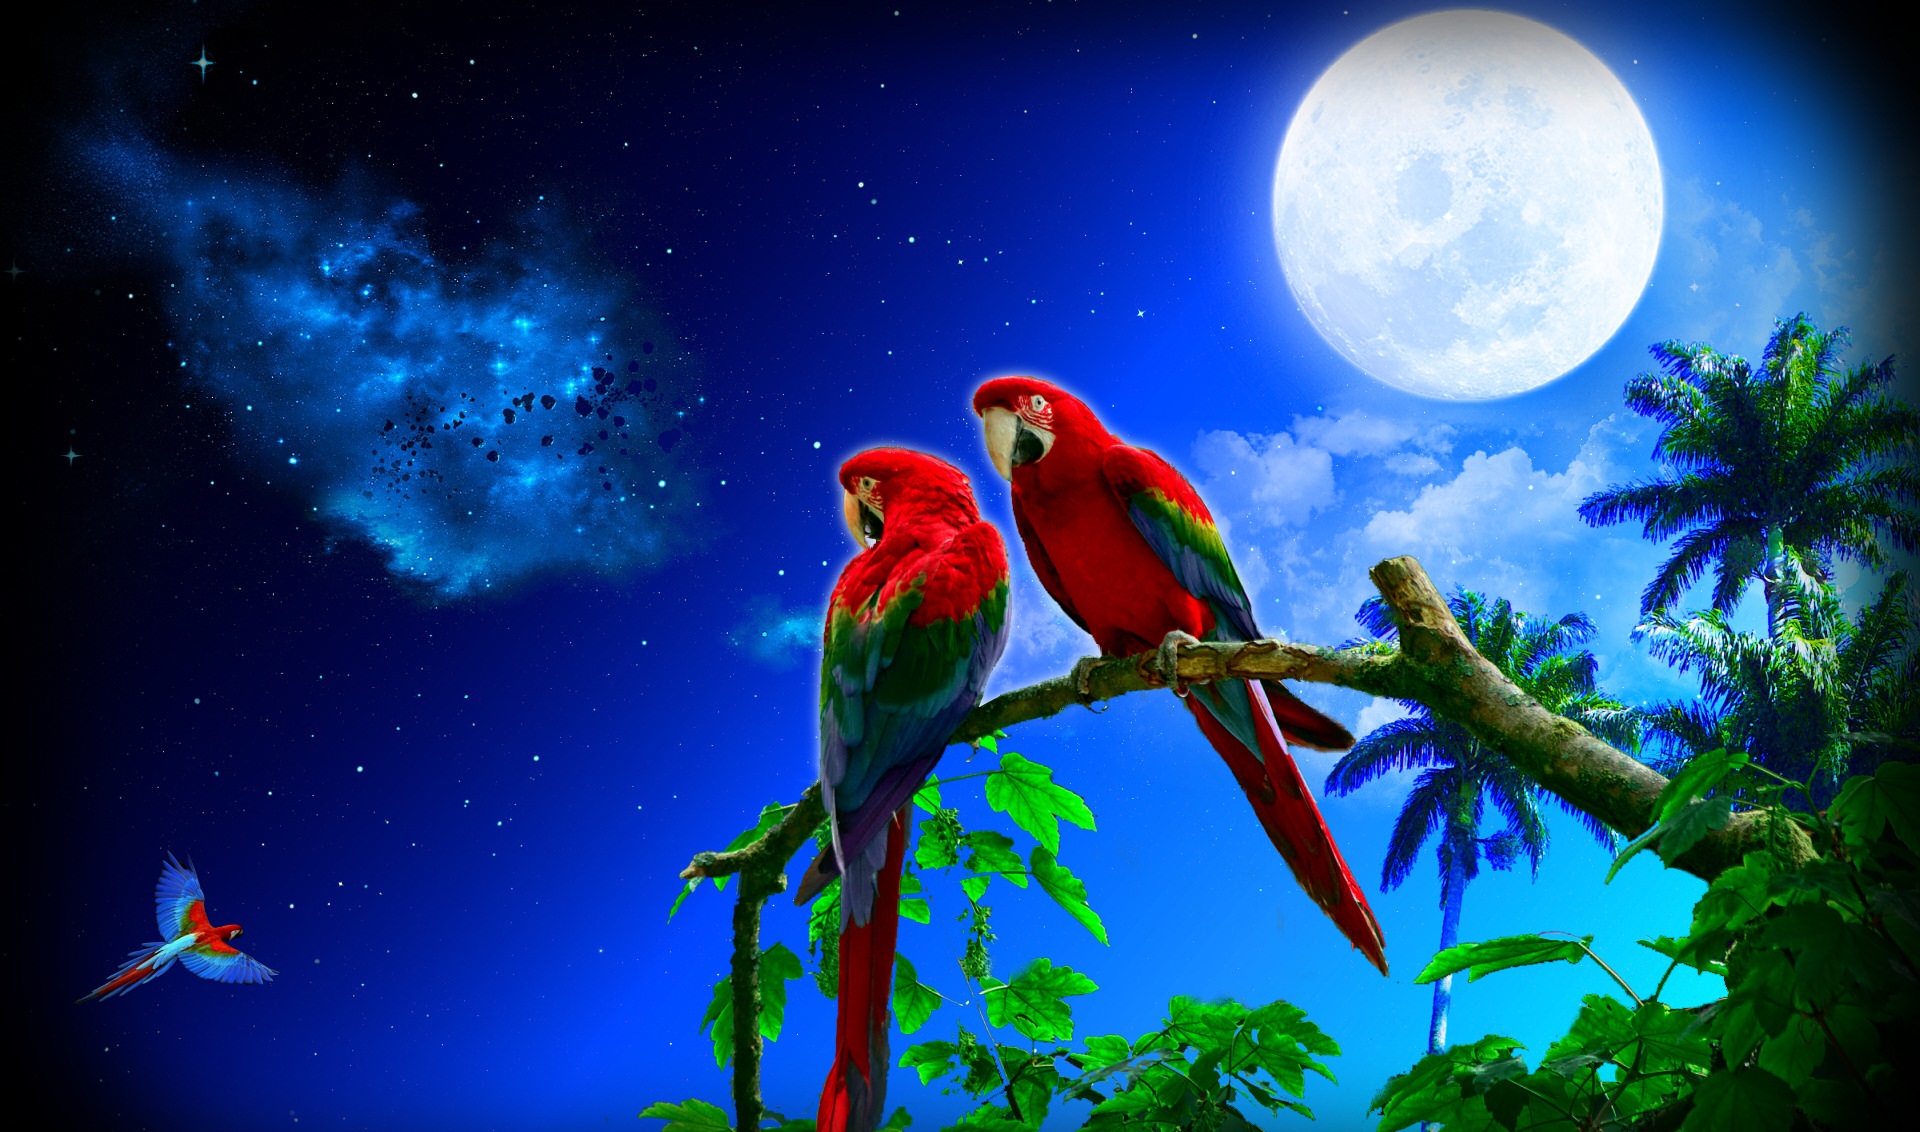 World's Most Beautiful Parrot Images HD Wallpapers